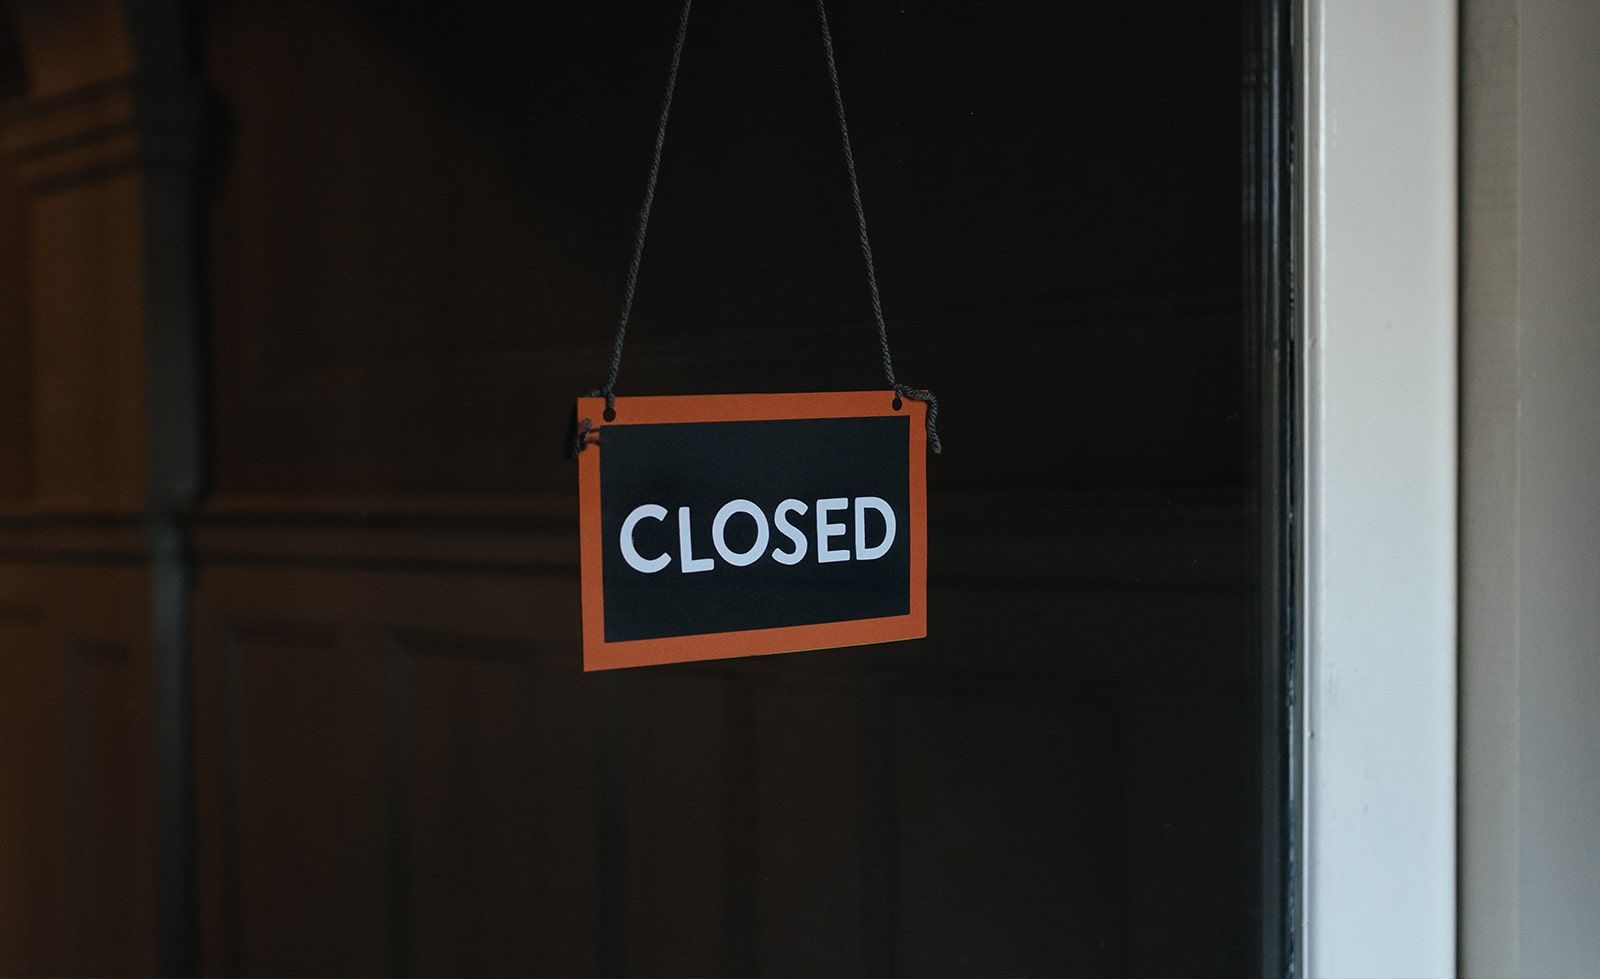 Closure of business